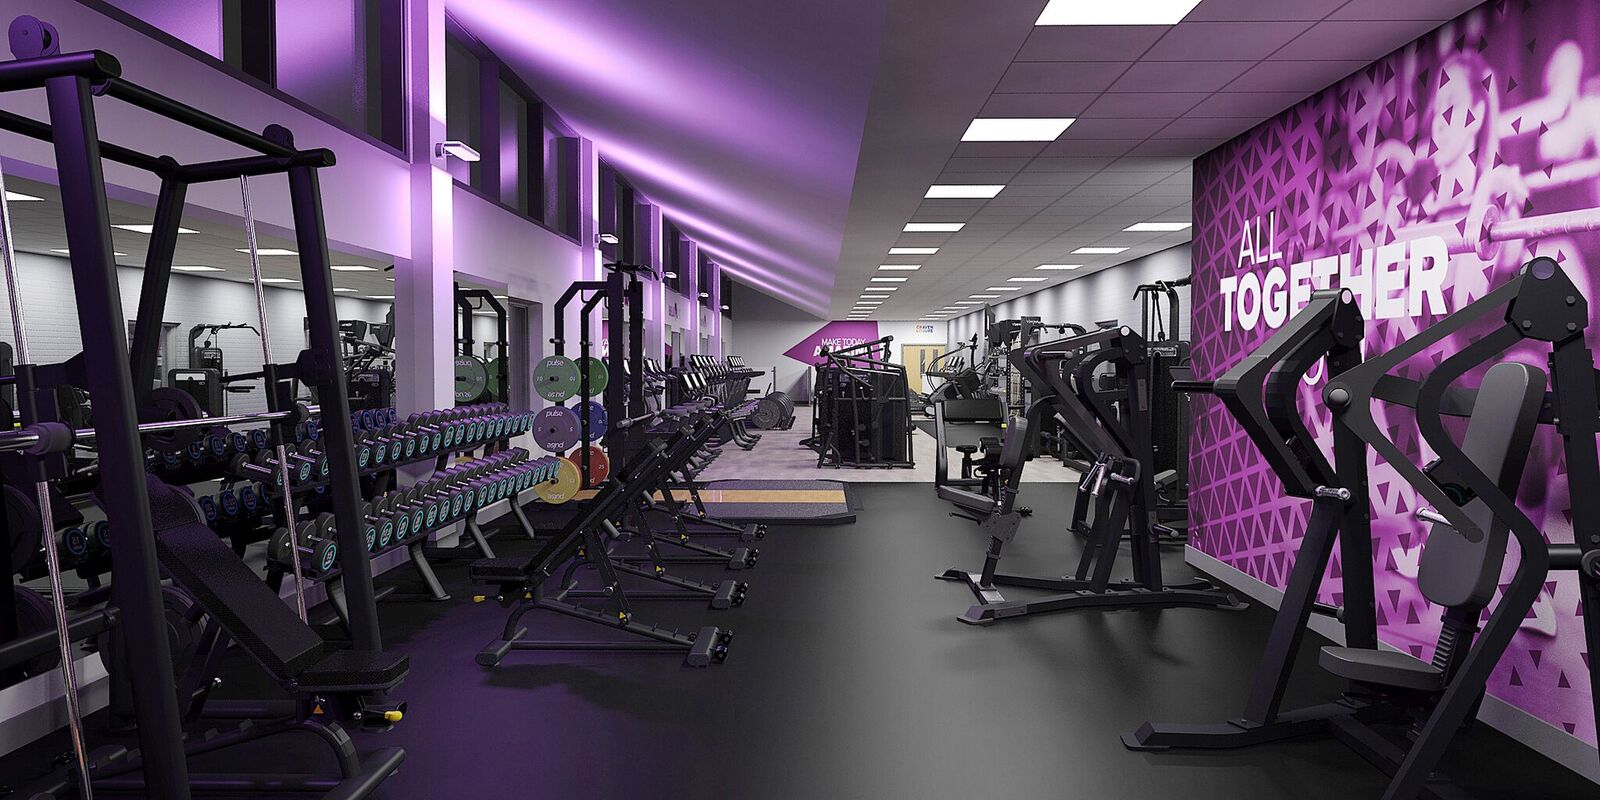  Can You Pay For A Day At Planet Fitness for Burn Fat fast